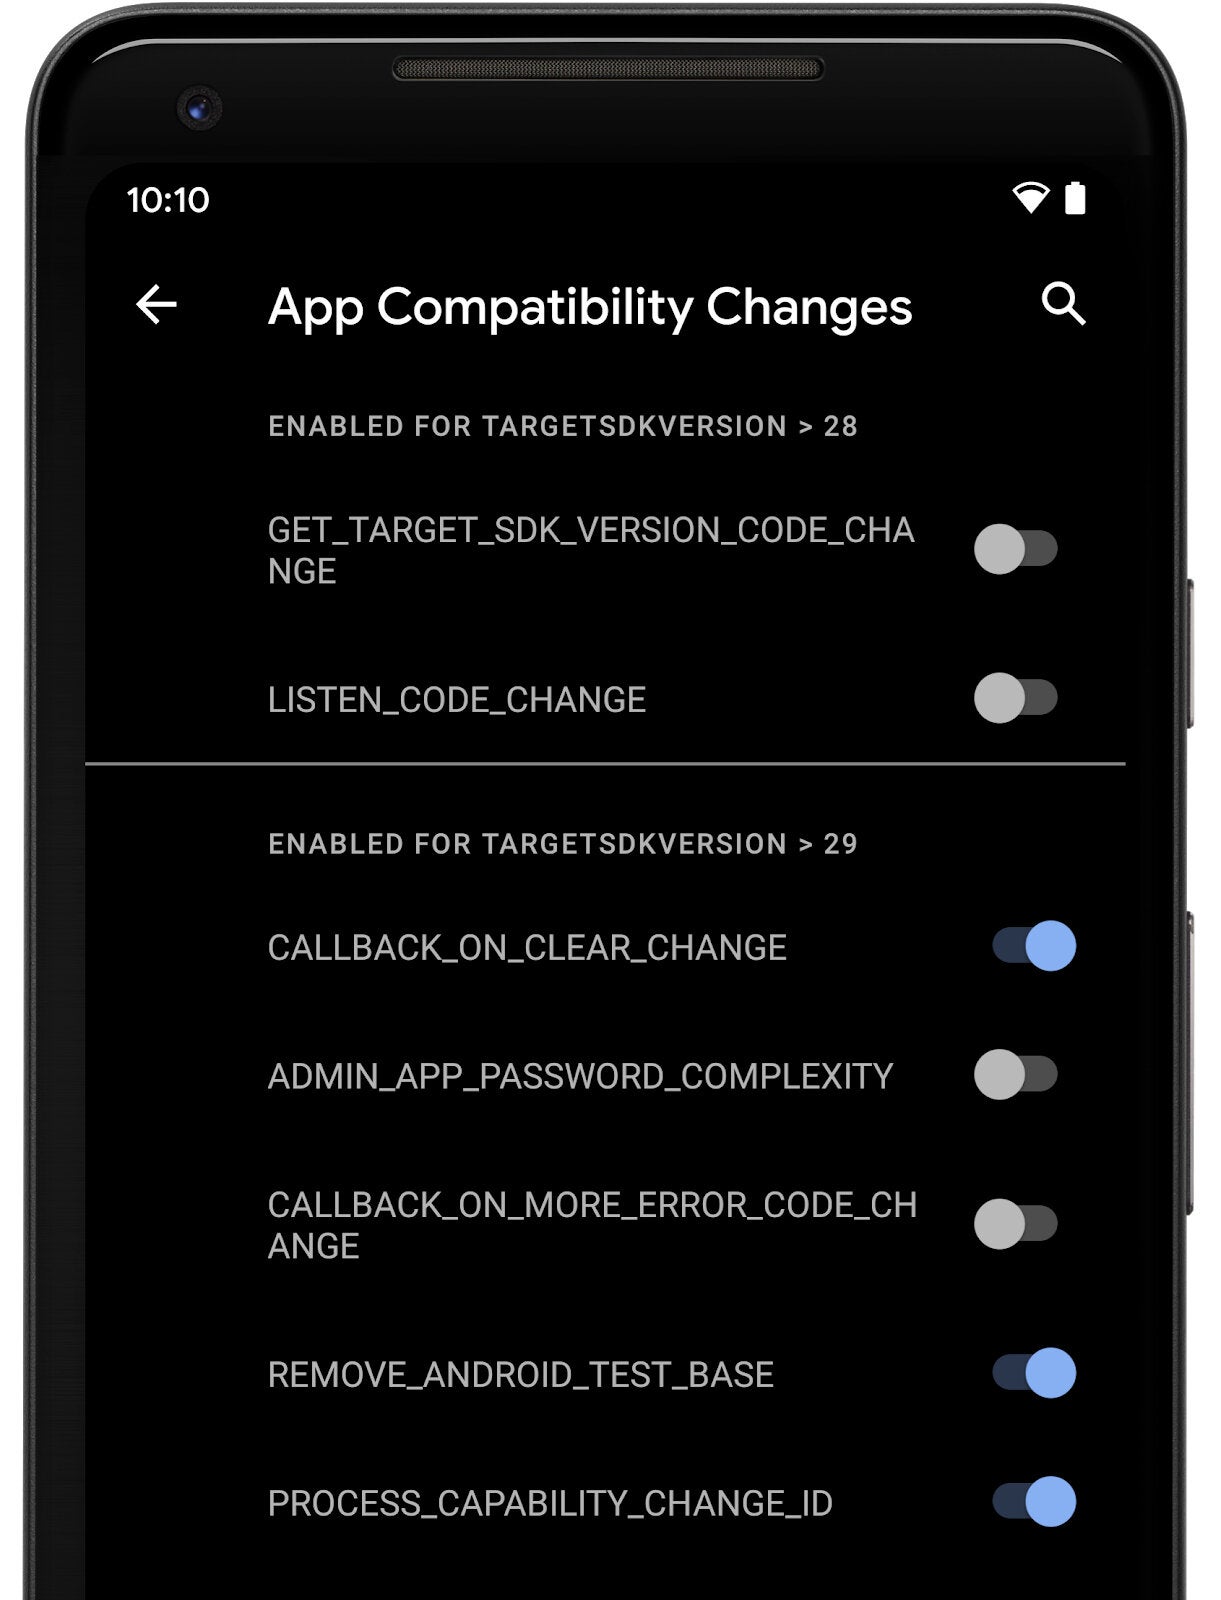 App compatibility toggles in Developer Options - Google is launching Android 11 Developer Preview for Pixel phones early